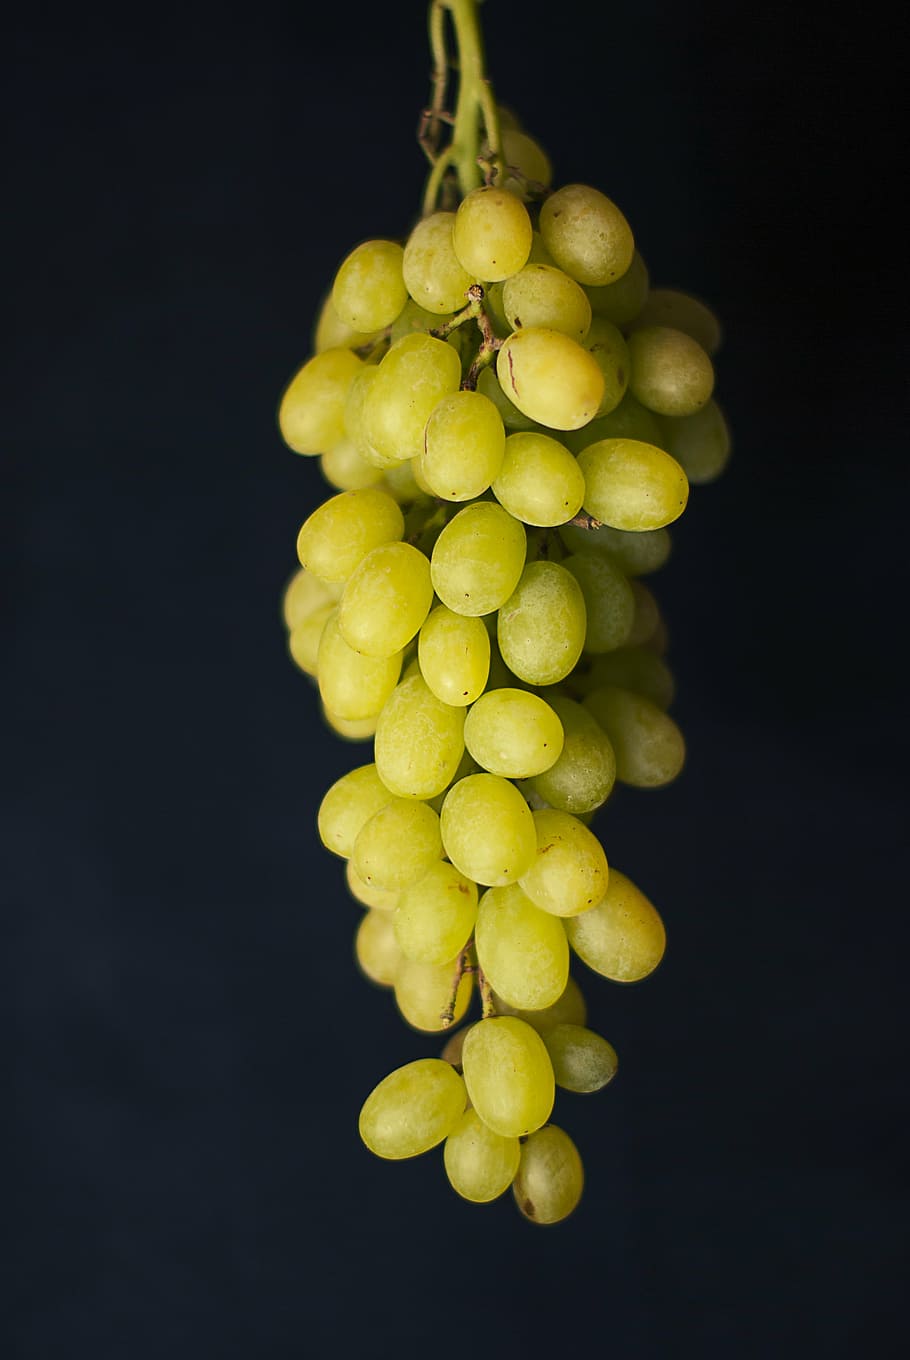 green grapes, green, grapes, fruits, food, healthy, black background, studio shot, food and drink, bunch